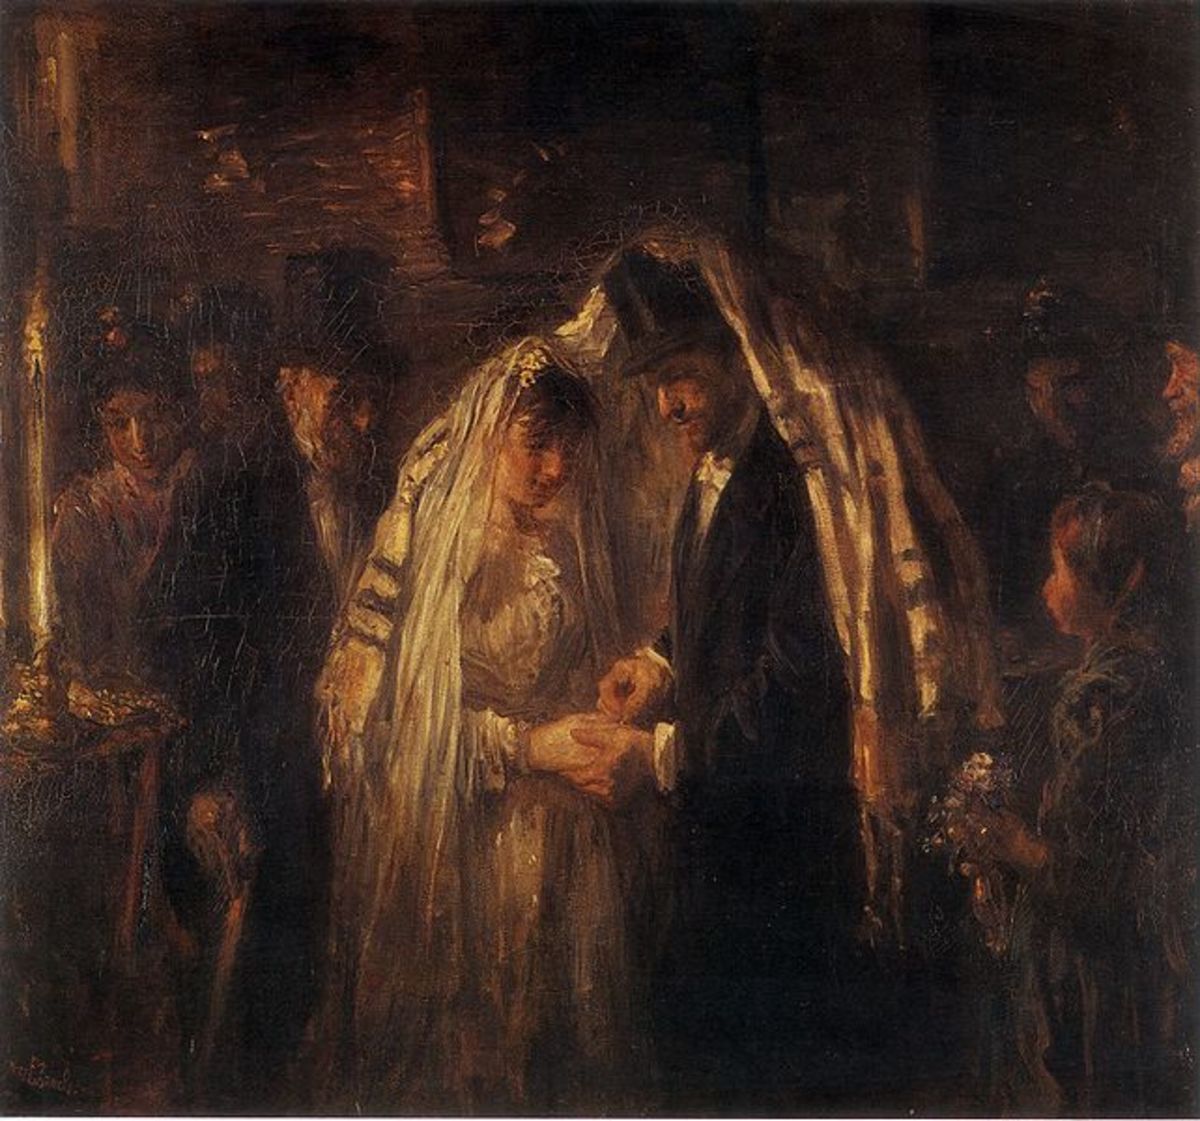 A Jewish wedding by Josef Israels, 1903, Courtesy of Wiki Commons. This painting can be seen in the Rijksmuseum, Amsterdam, Holland